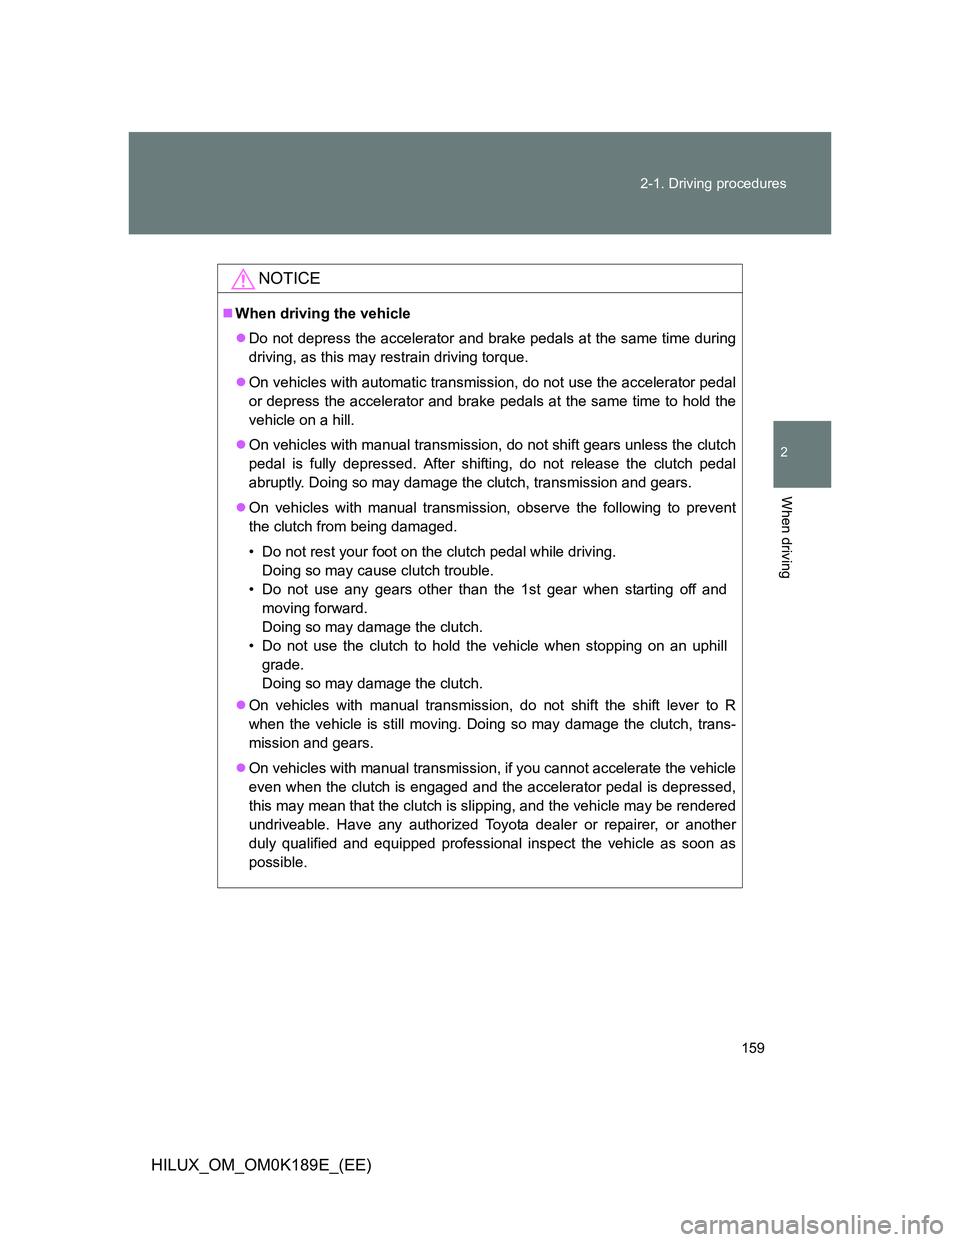 TOYOTA HILUX 2013  Owners Manual (in English) 159 2-1. Driving procedures
2
When driving
HILUX_OM_OM0K189E_(EE)
NOTICE
When driving the vehicle
Do not depress the accelerator and brake pedals at the same time during
driving, as this may res